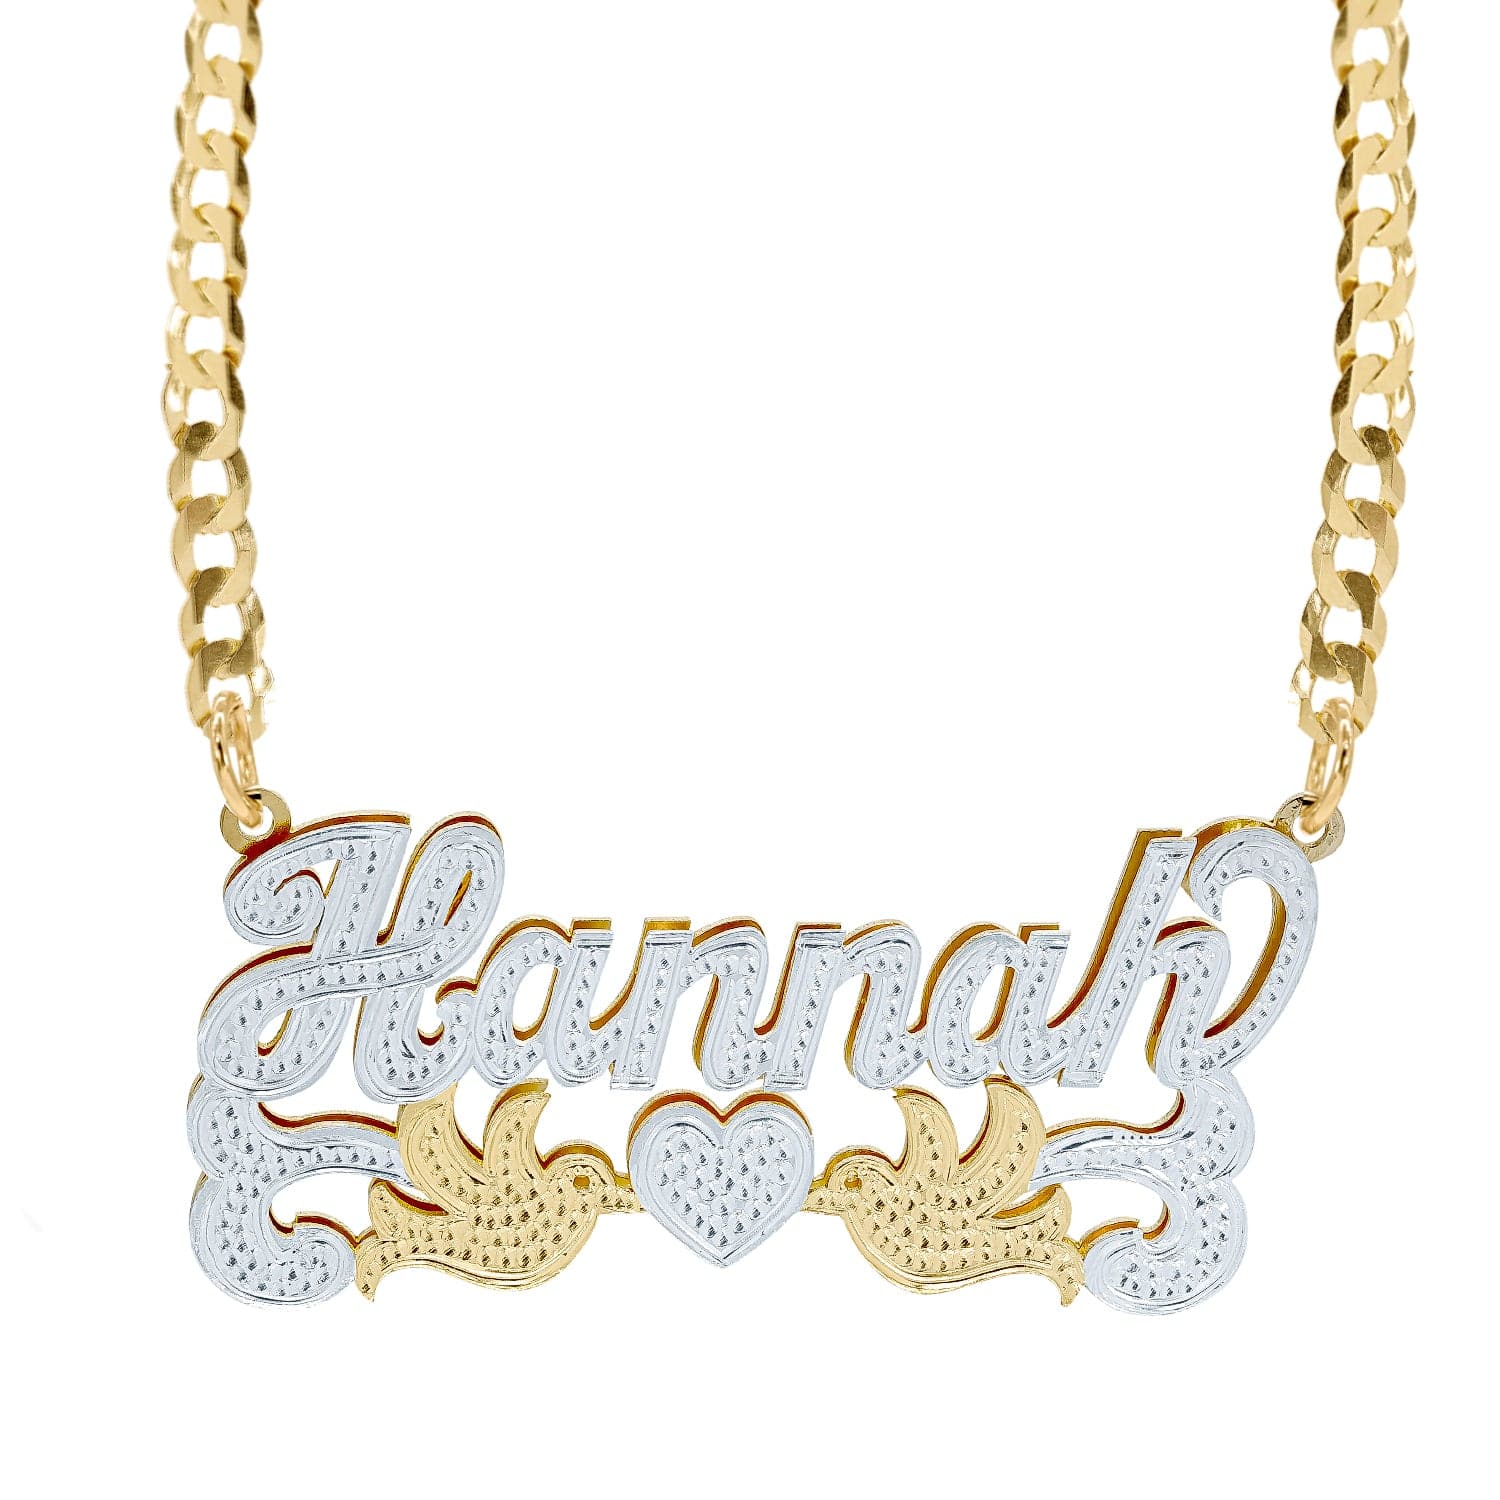 Solid Gold Double Nameplate Necklace w/ Love Birds "Hannah"